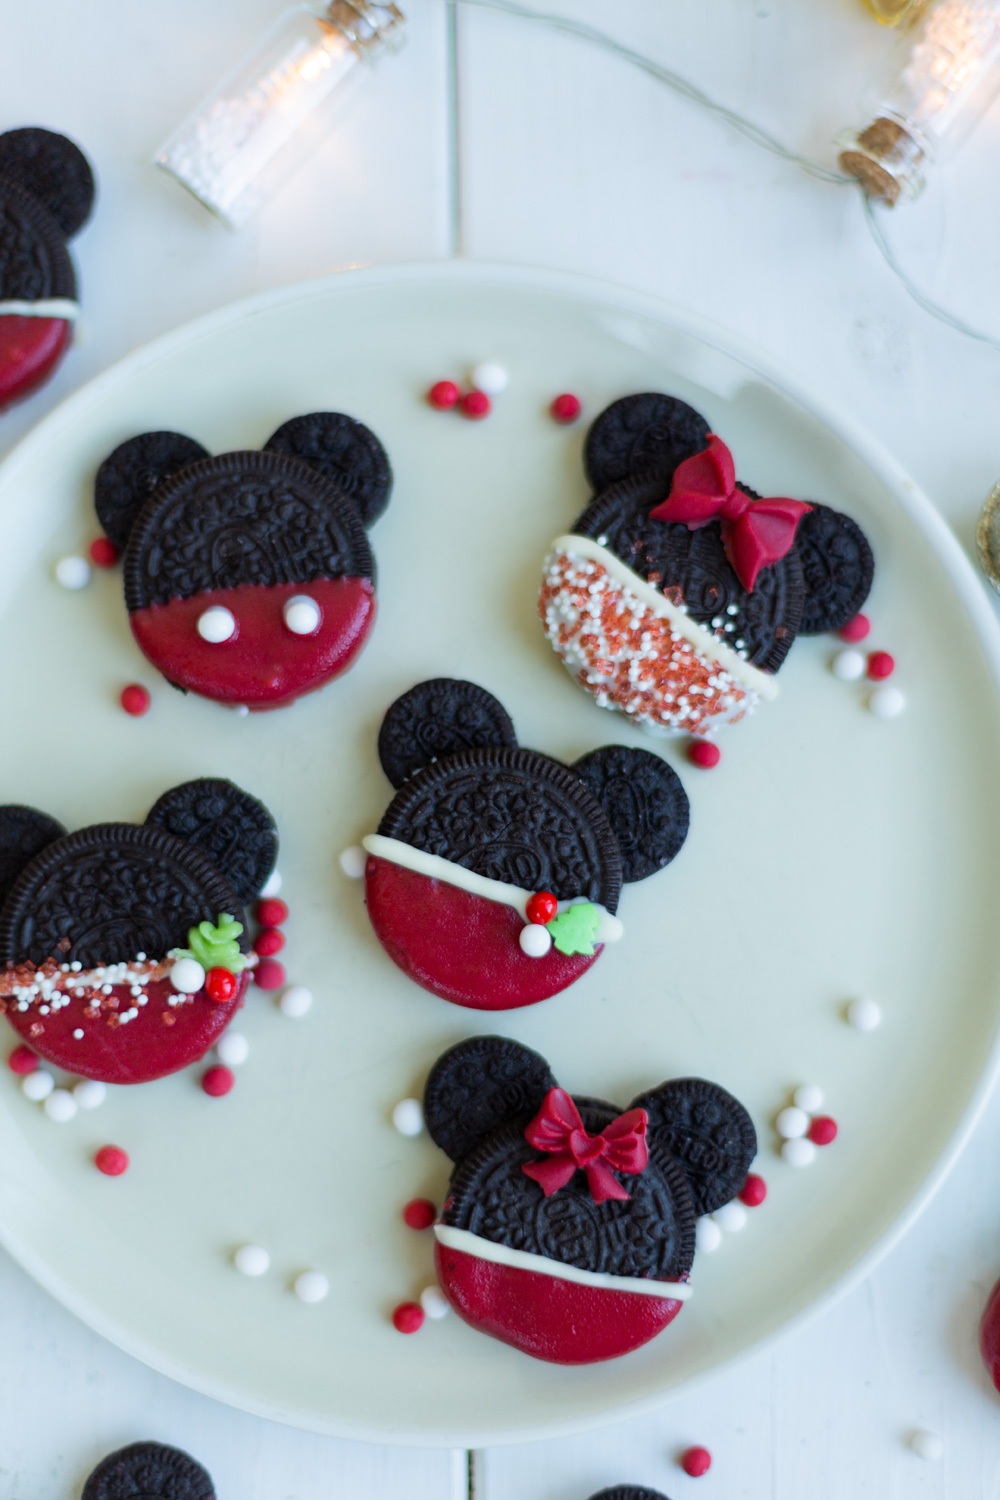 Mickey Mouse Kekse und Minnie Mouse OREO Cookies